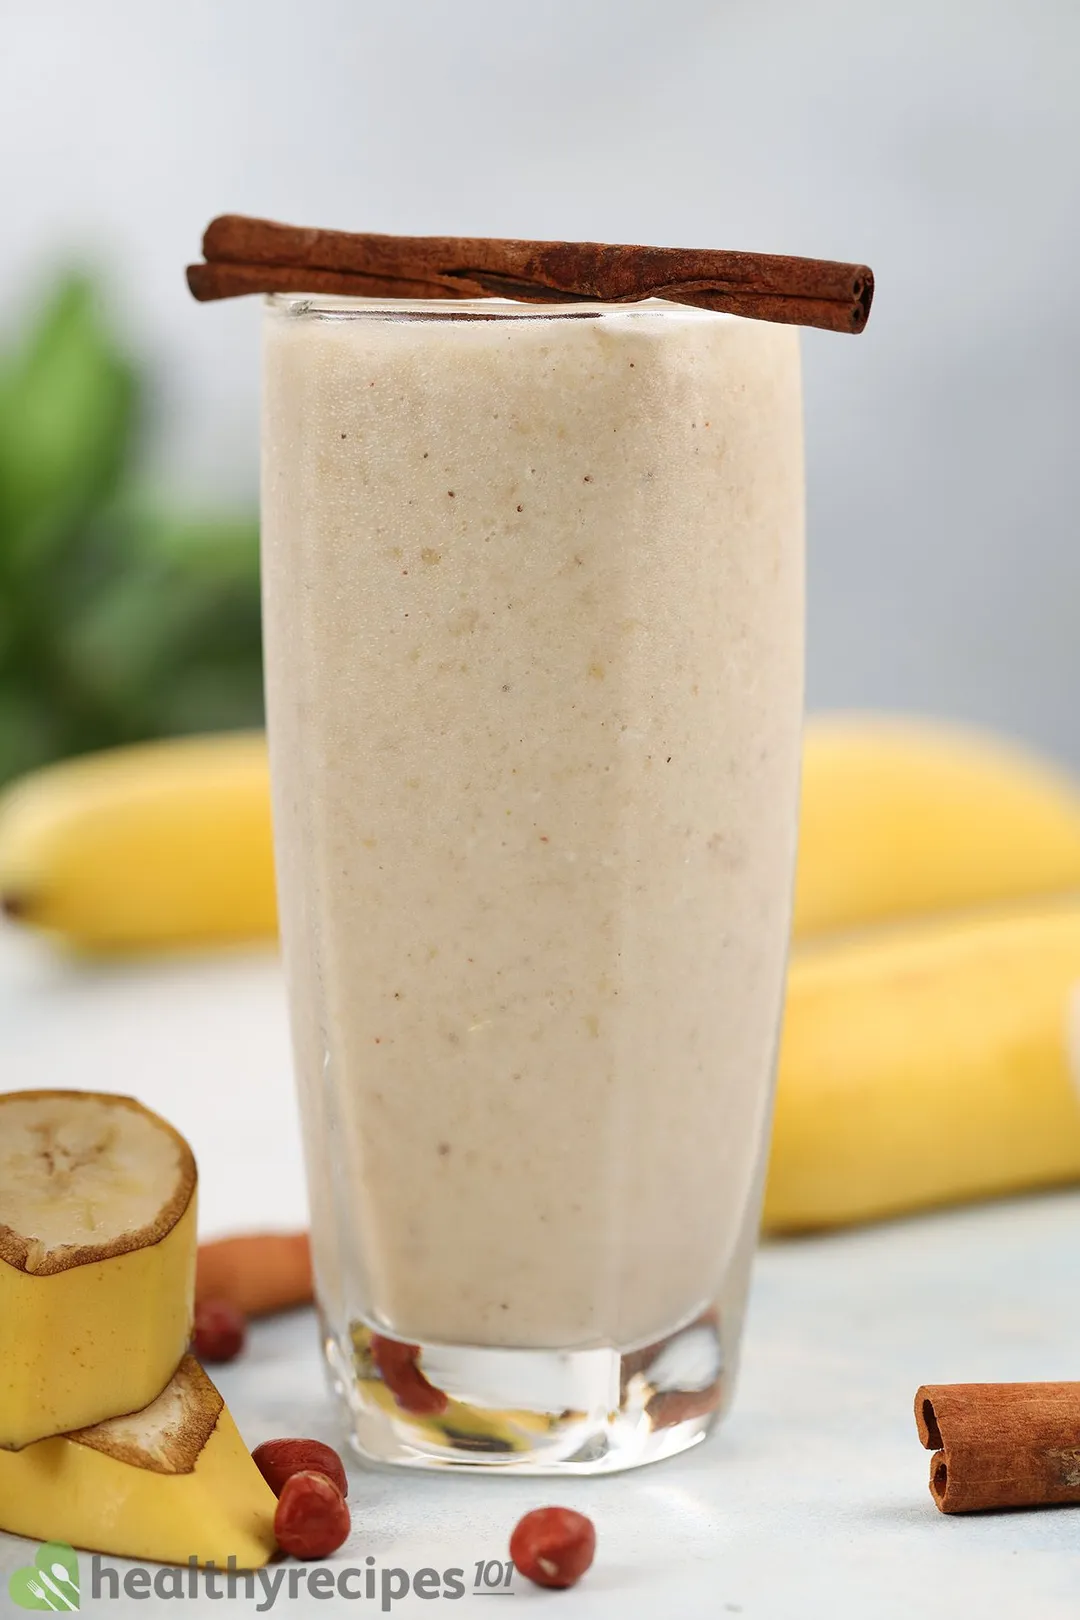 A glass of peanut butter banana smoothie surrounded by bananas, peanuts, and has a cinnamon stick placed on top of it.